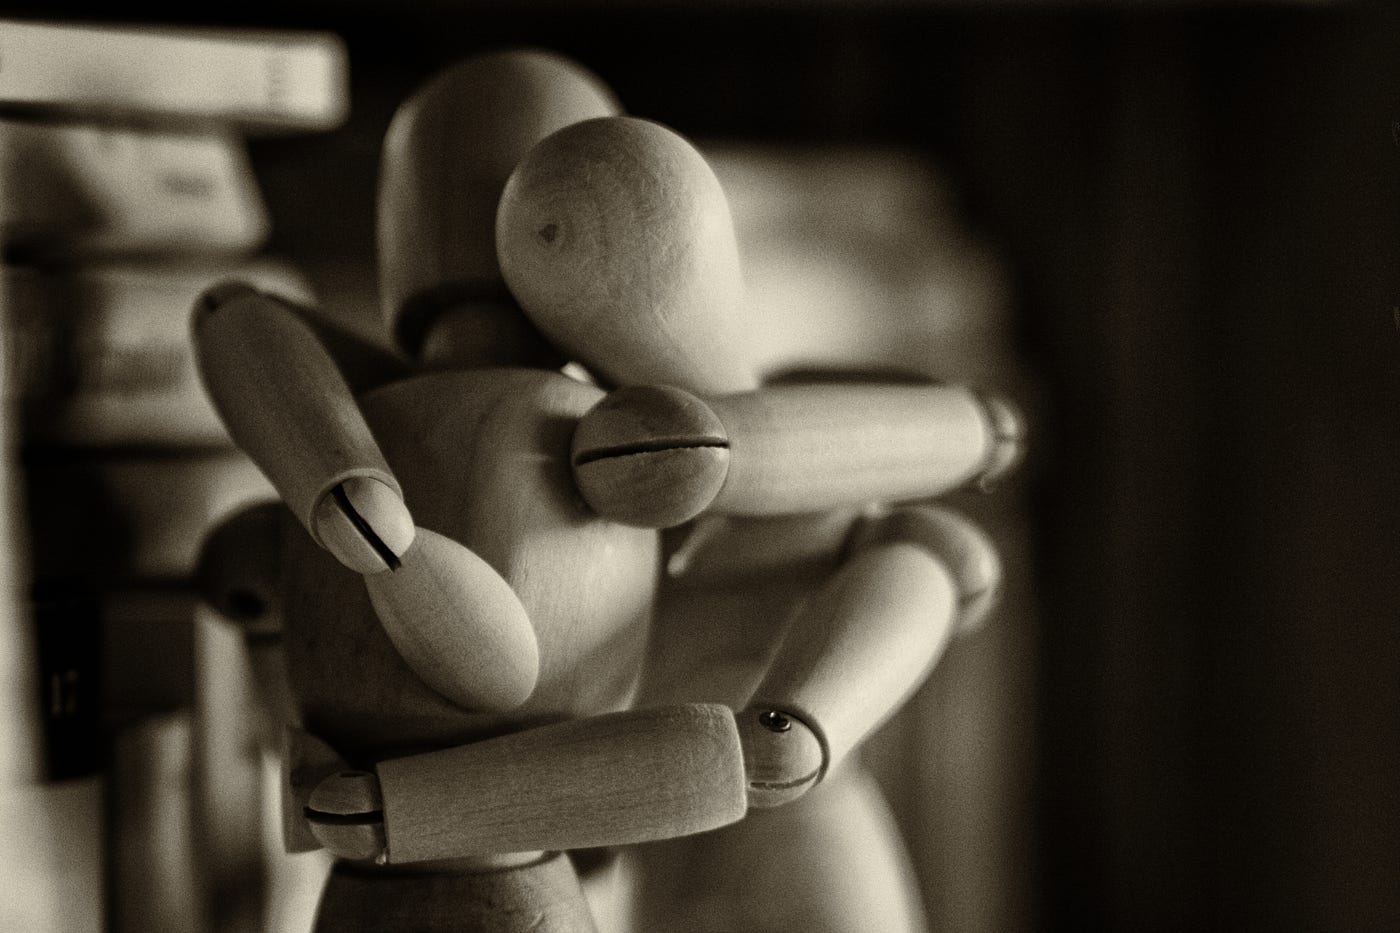 Sepia toned image of two wooden artist’s mannequins wrapped in an embrace